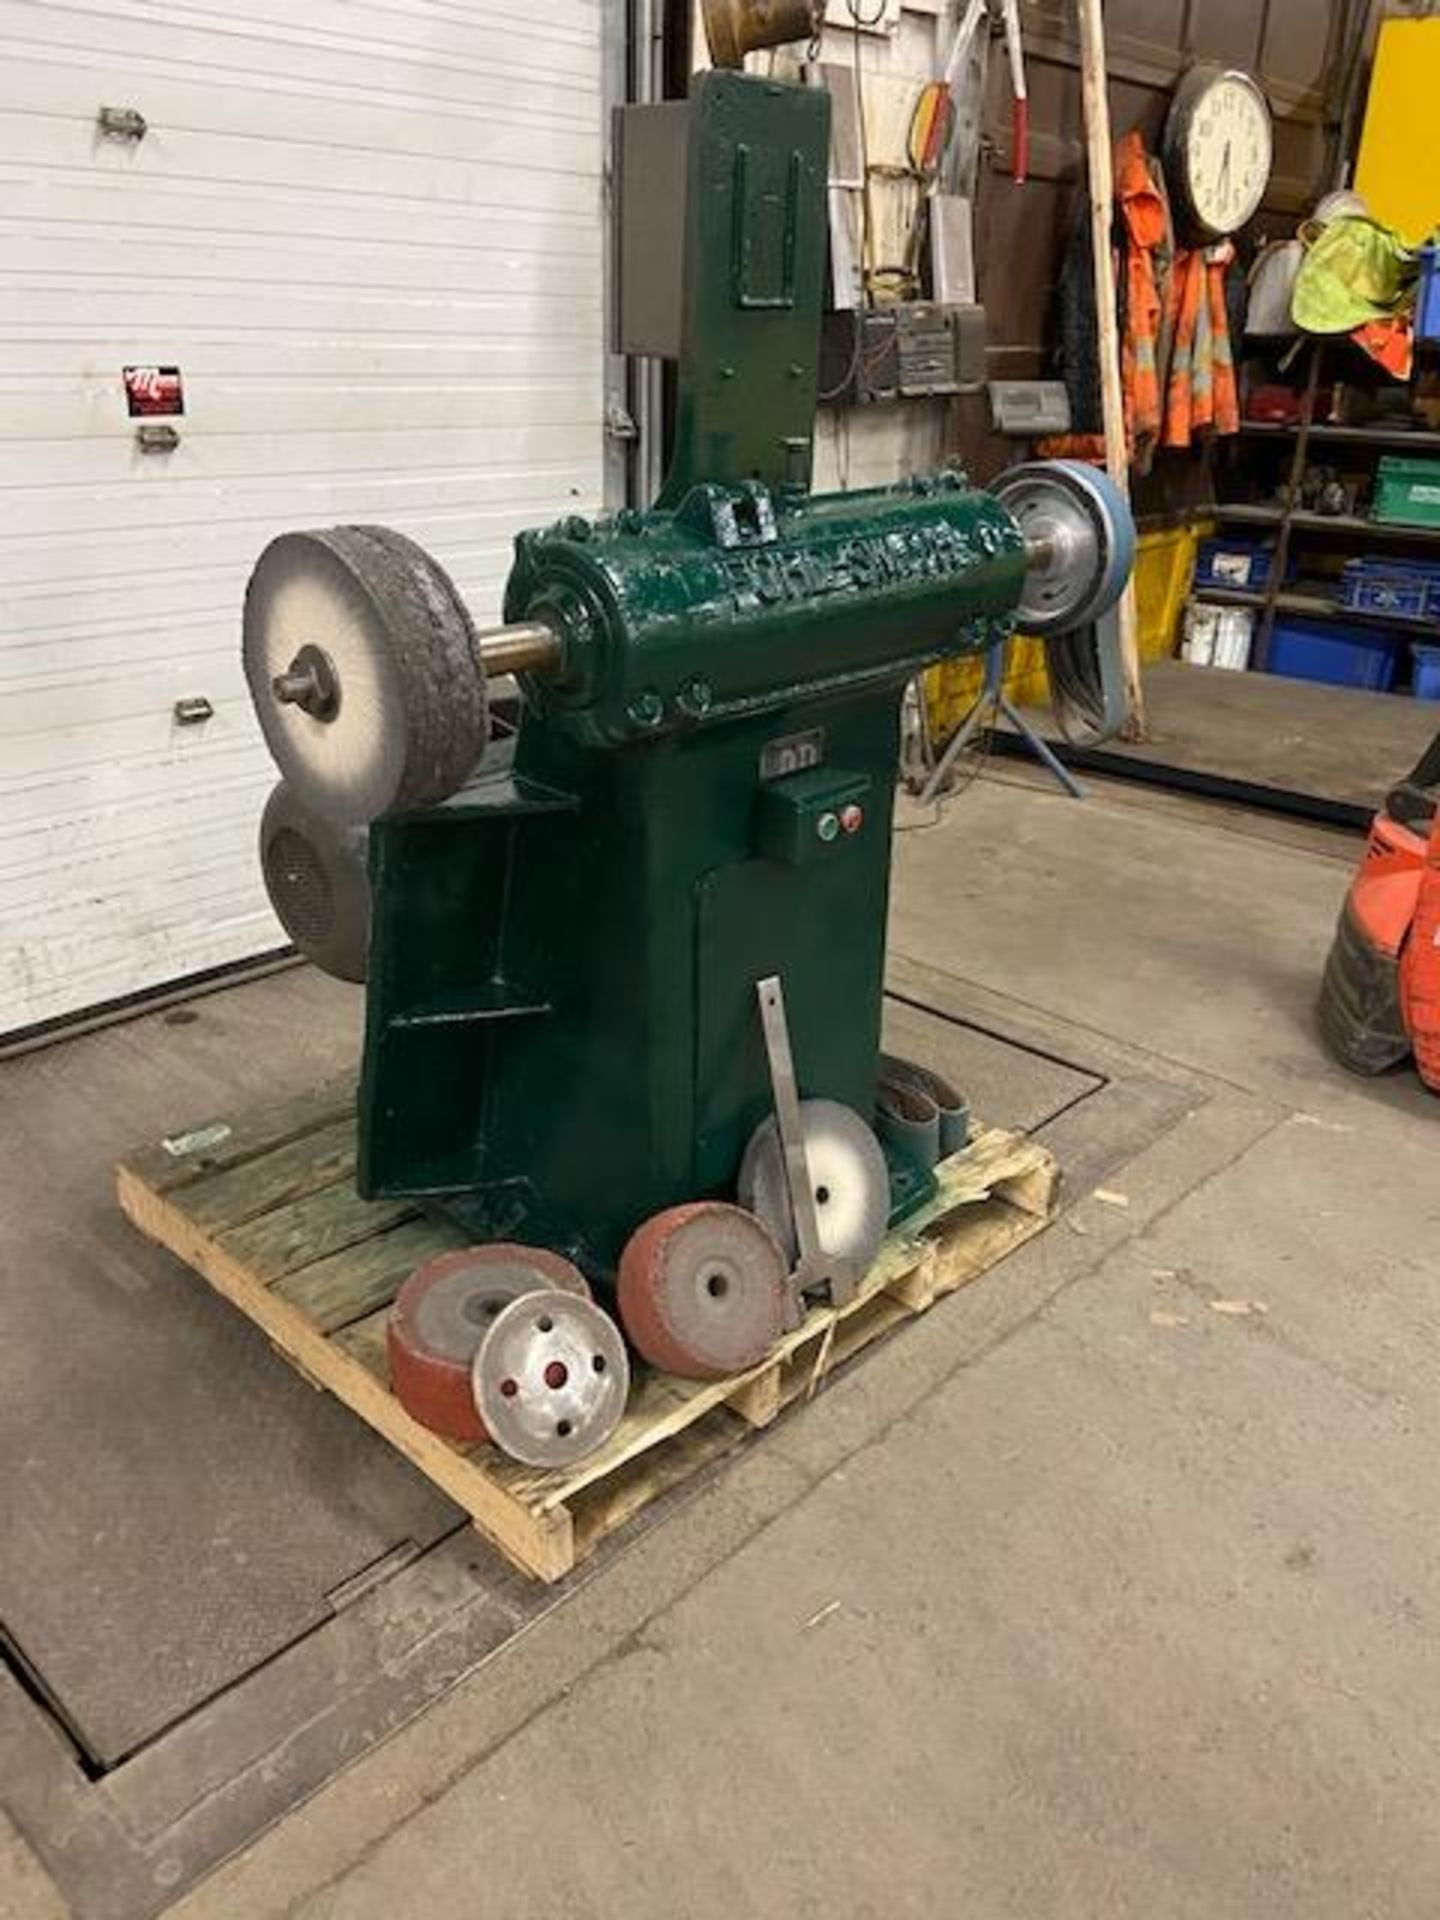 Ford Smith Buffer Polisher Sander Unit with Spare parts - 4' wide unit MINT - Image 2 of 2